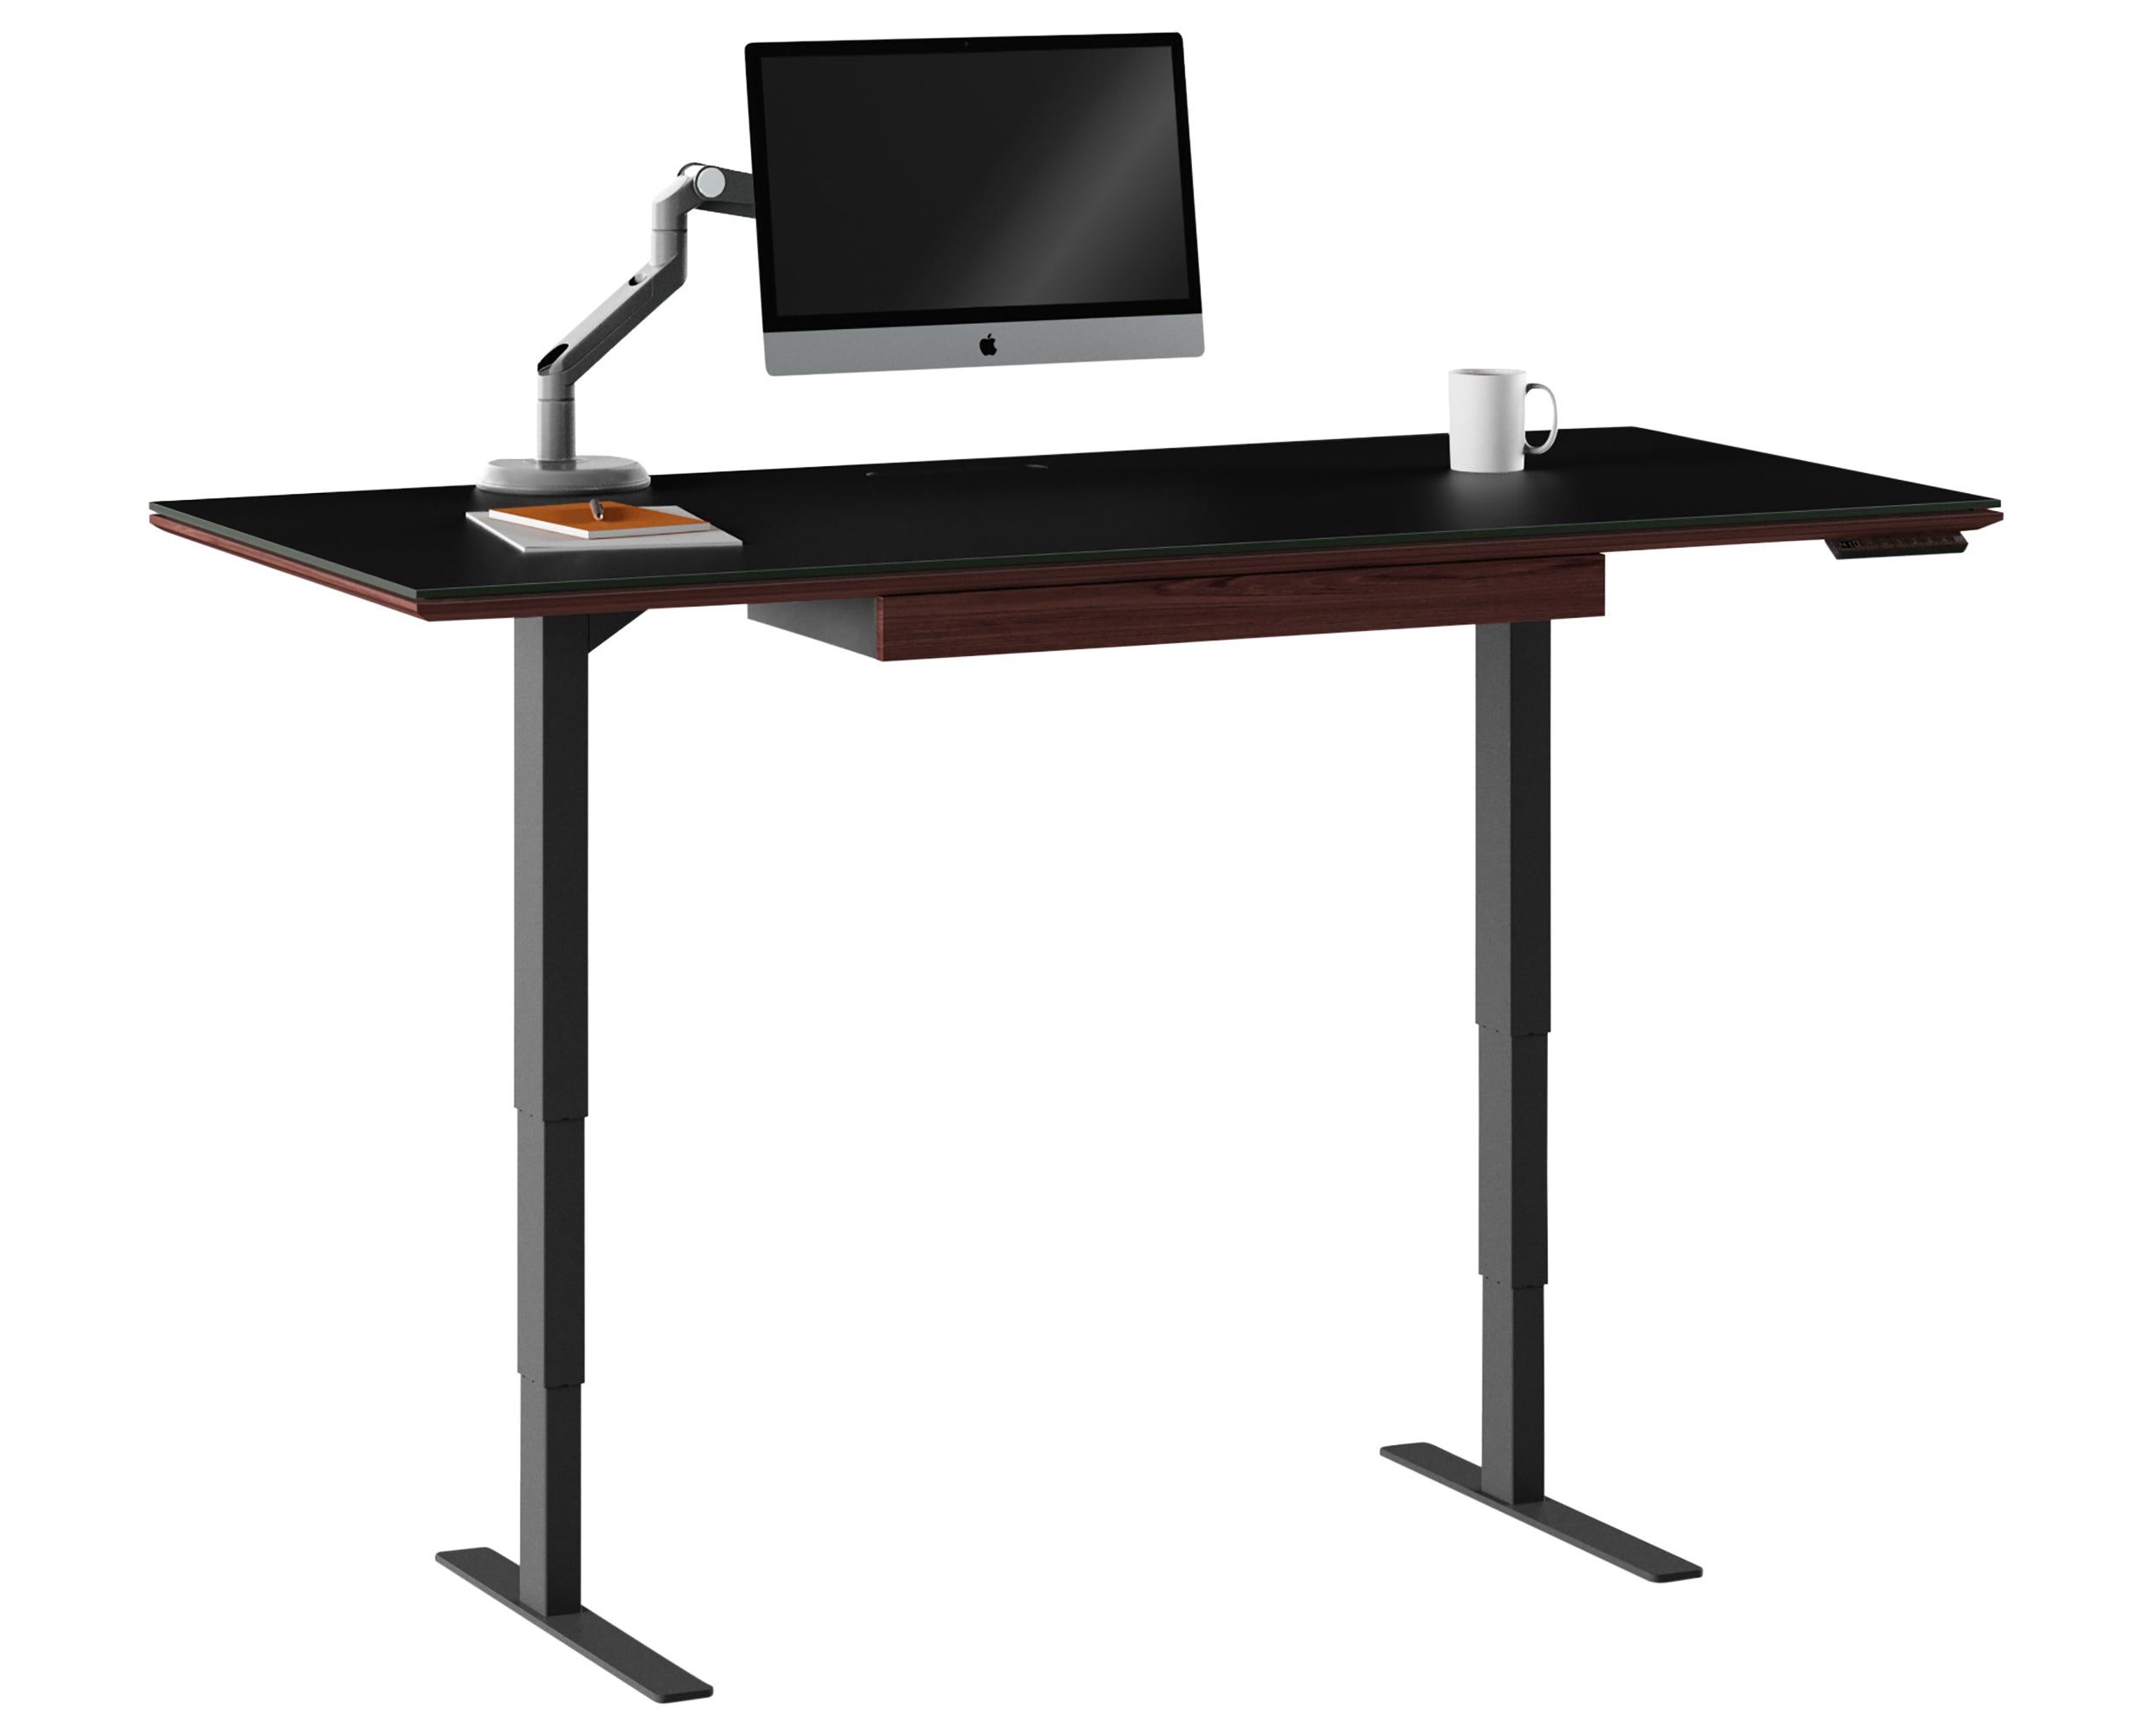 Chocolate Stained Walnut &amp; Chocolate Walnut Veneer with Black Satin-Etched Glass &amp; Black Steel | BDI Sequel Large Lift Desk | Valley Ridge Furniture